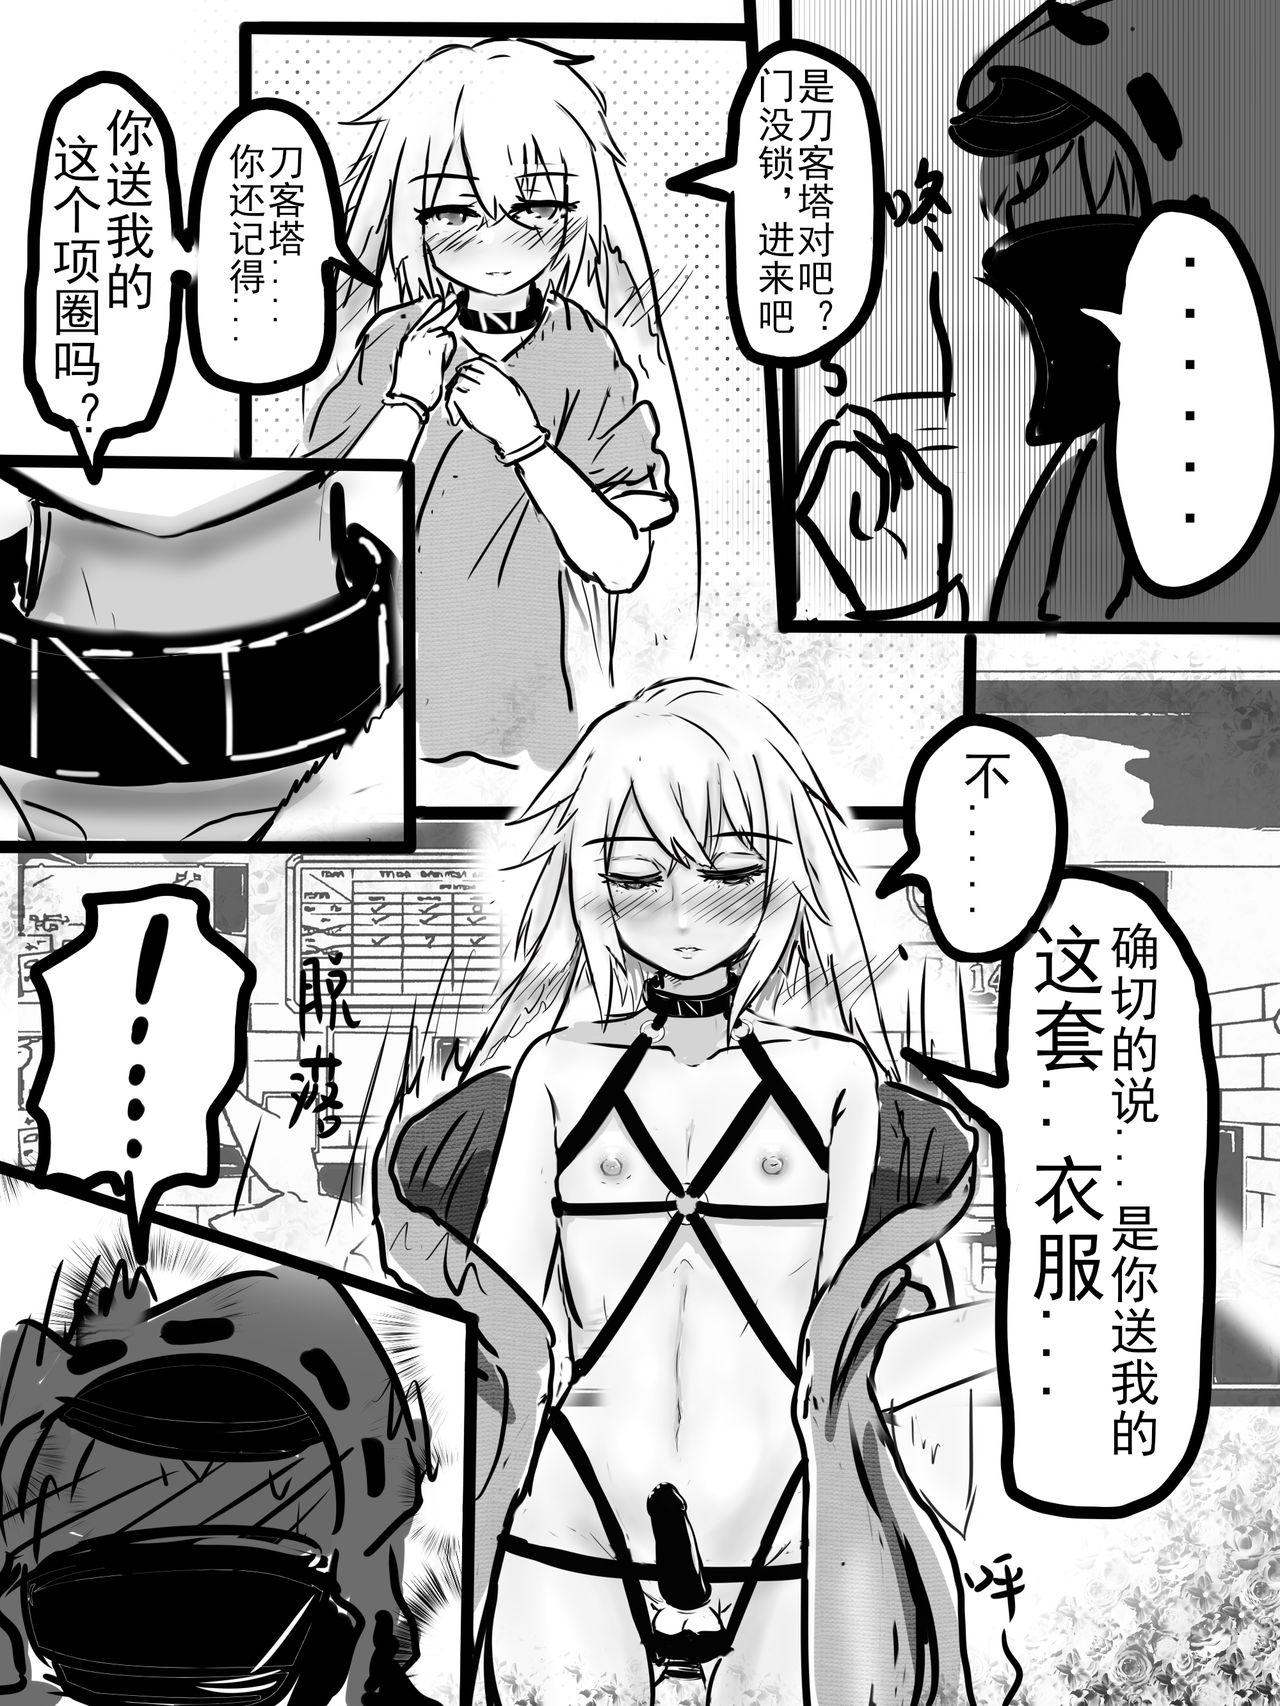 Wet Pussy 安赛尔的特别服务1 - Arknights Man - Page 4